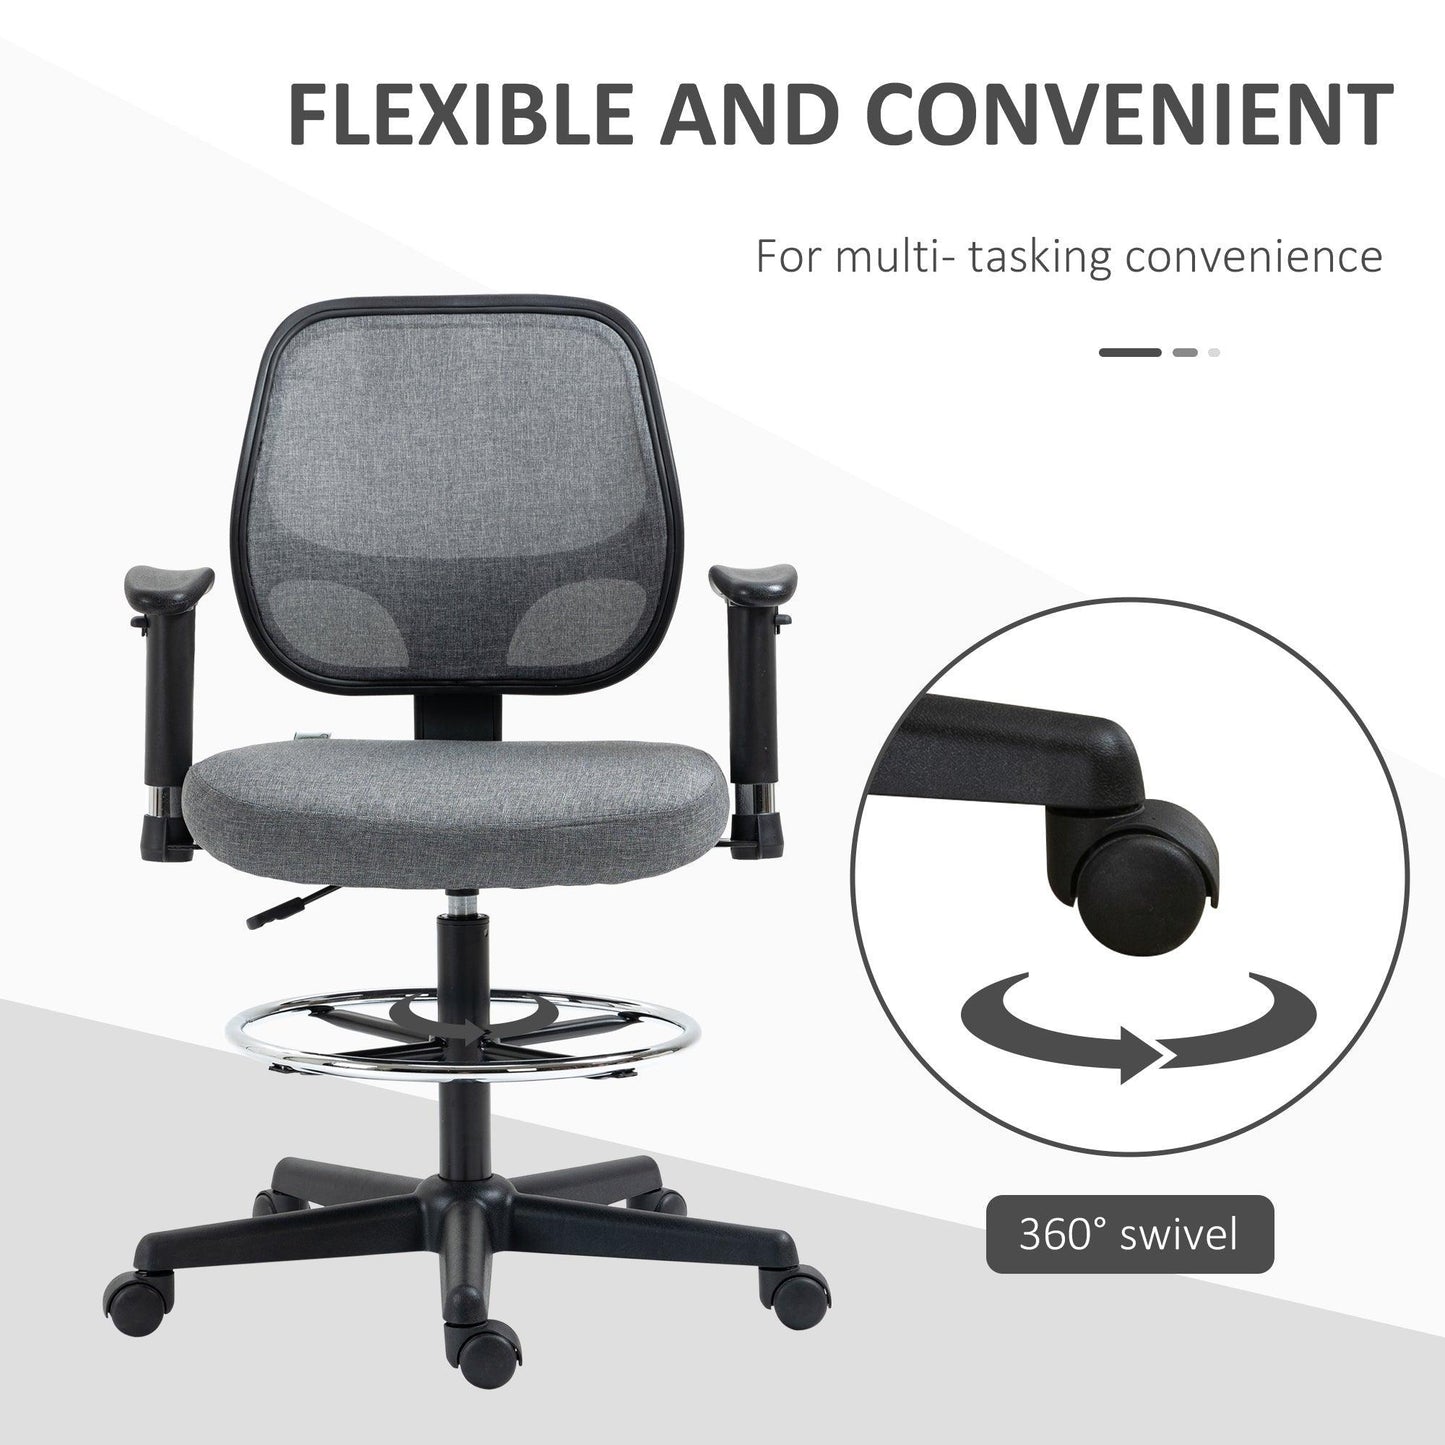 Vinsetto Drafting Chair-Grey with Adjustable Footrest - ALL4U RETAILER LTD